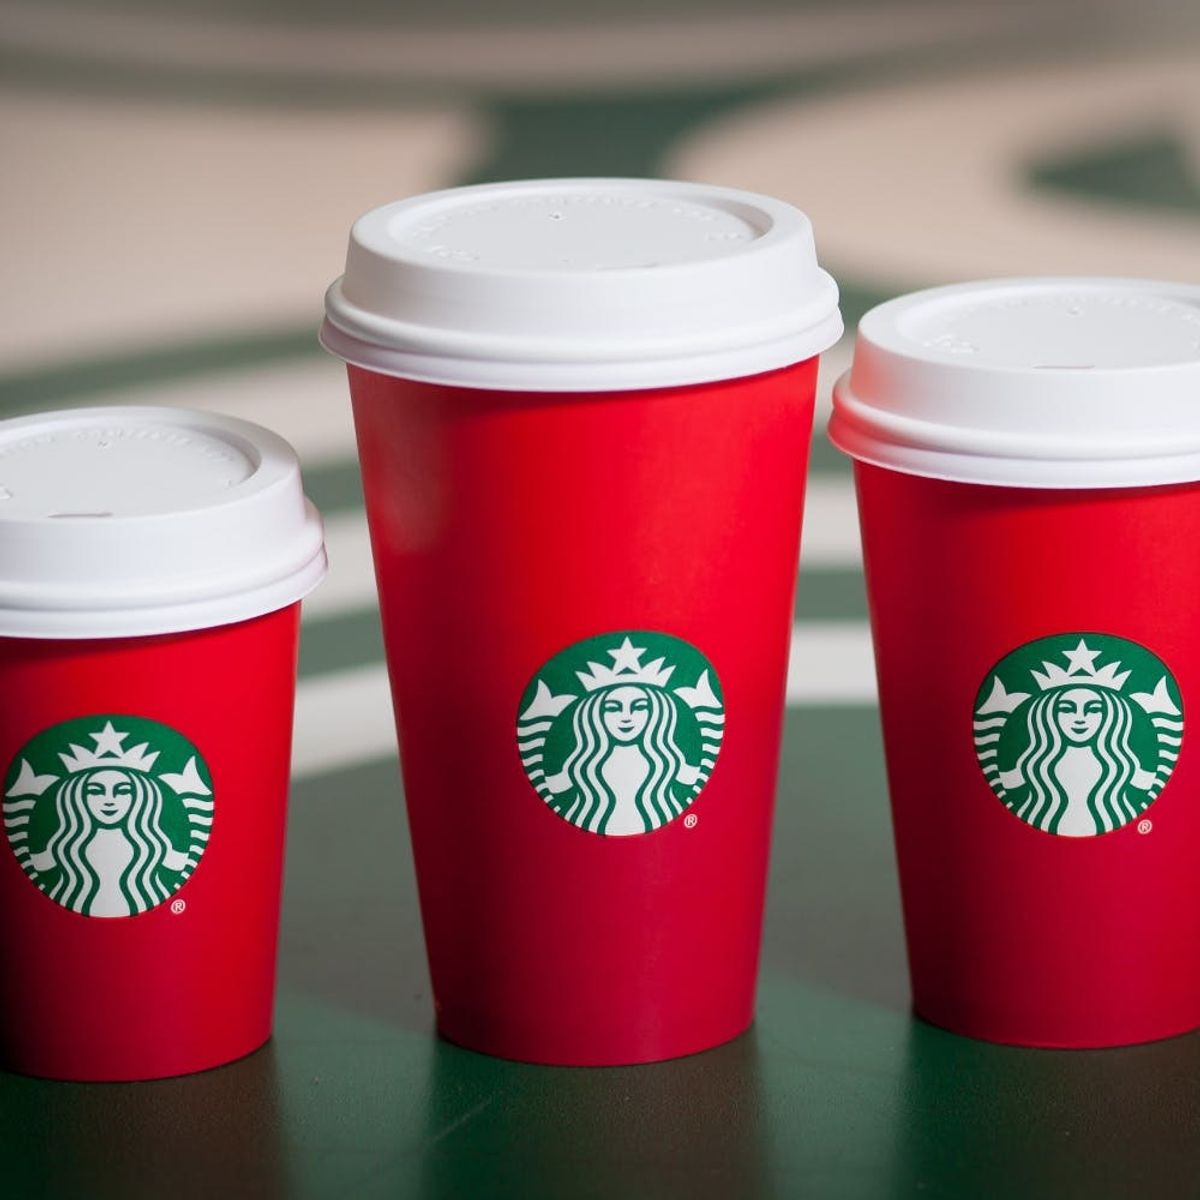 Here’s How Starbucks Just Got Entangled in Some Major Post-Election Drama